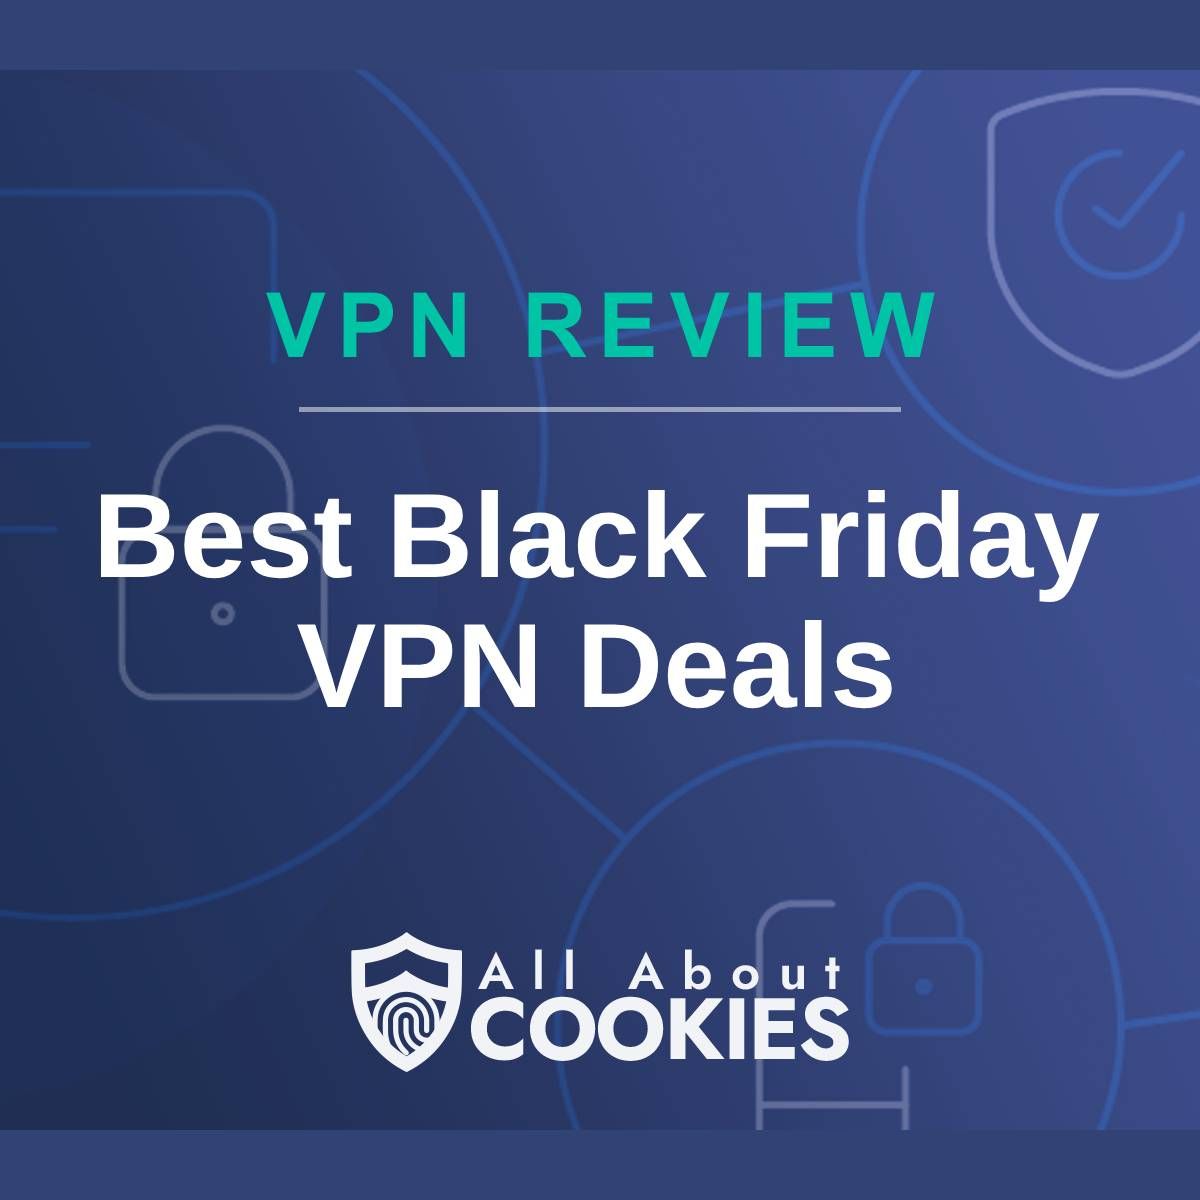 A blue background with images of locks and shields with the text &quot;VPN Review Best Black Friday VPN Deals&quot; and the All About Cookies logo. 